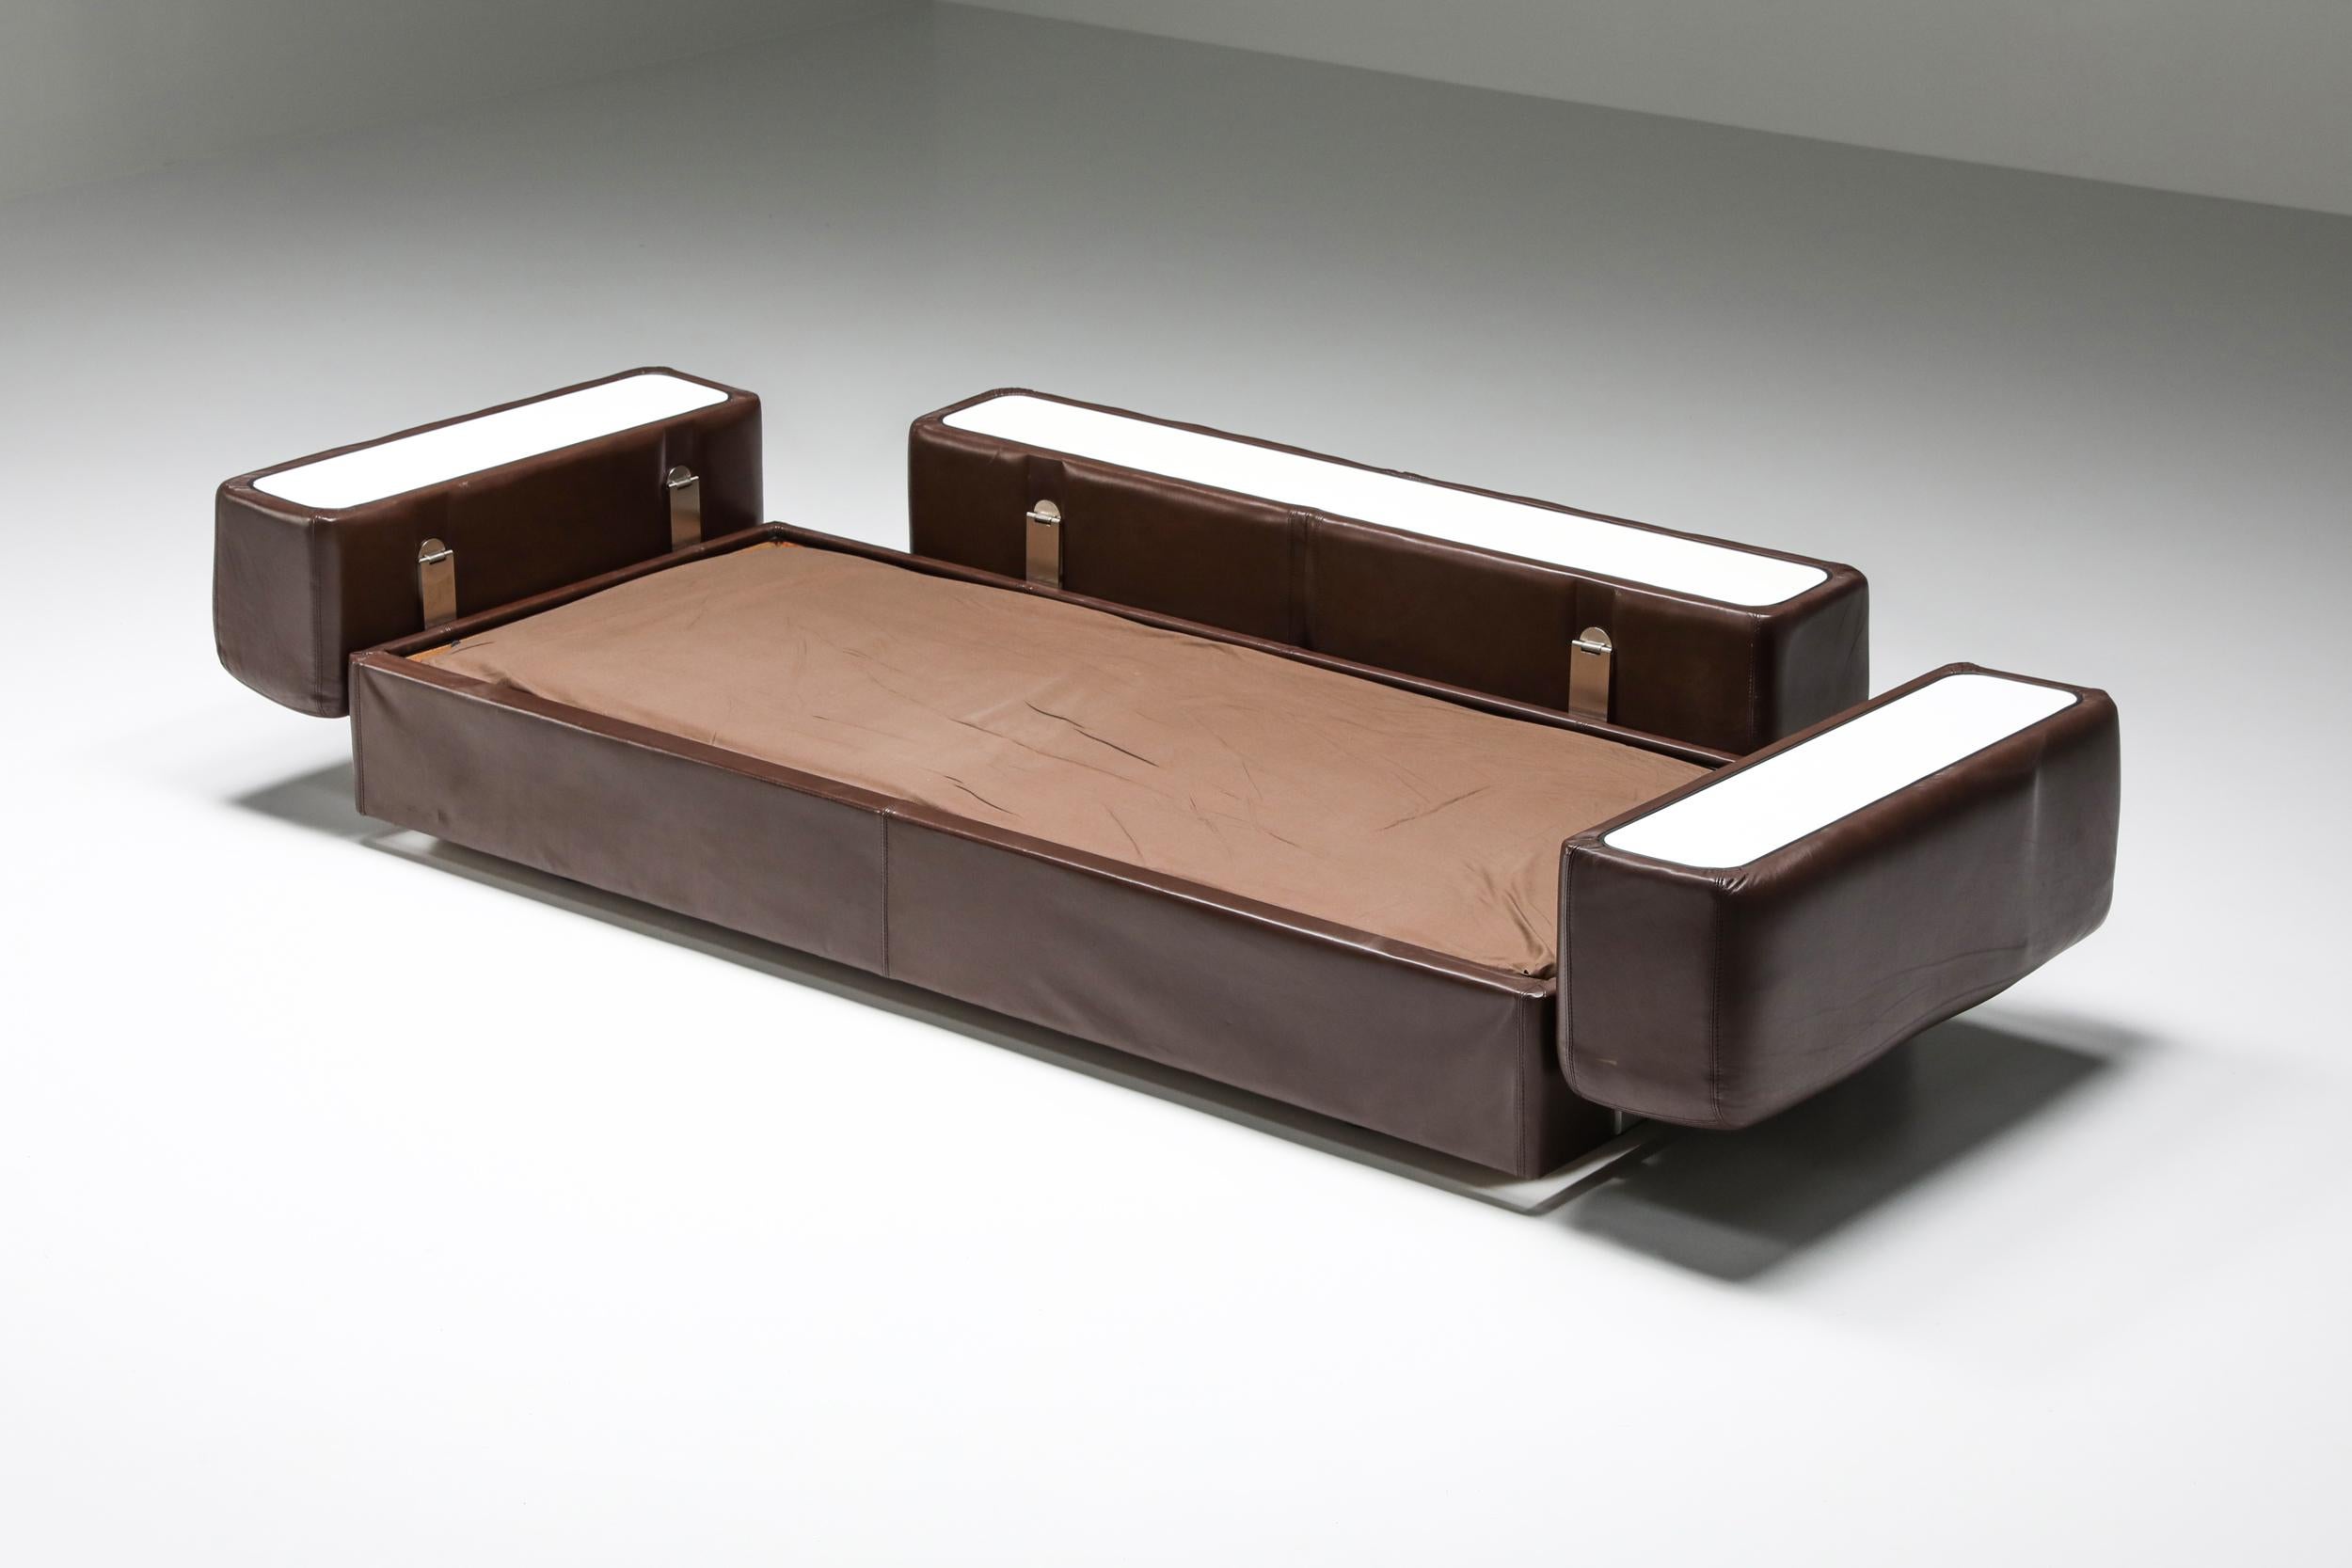 20th Century Post-Modern Daybed Sofa 711 by Tito Agnoli for Cinova in Brown Leather, 1960 For Sale